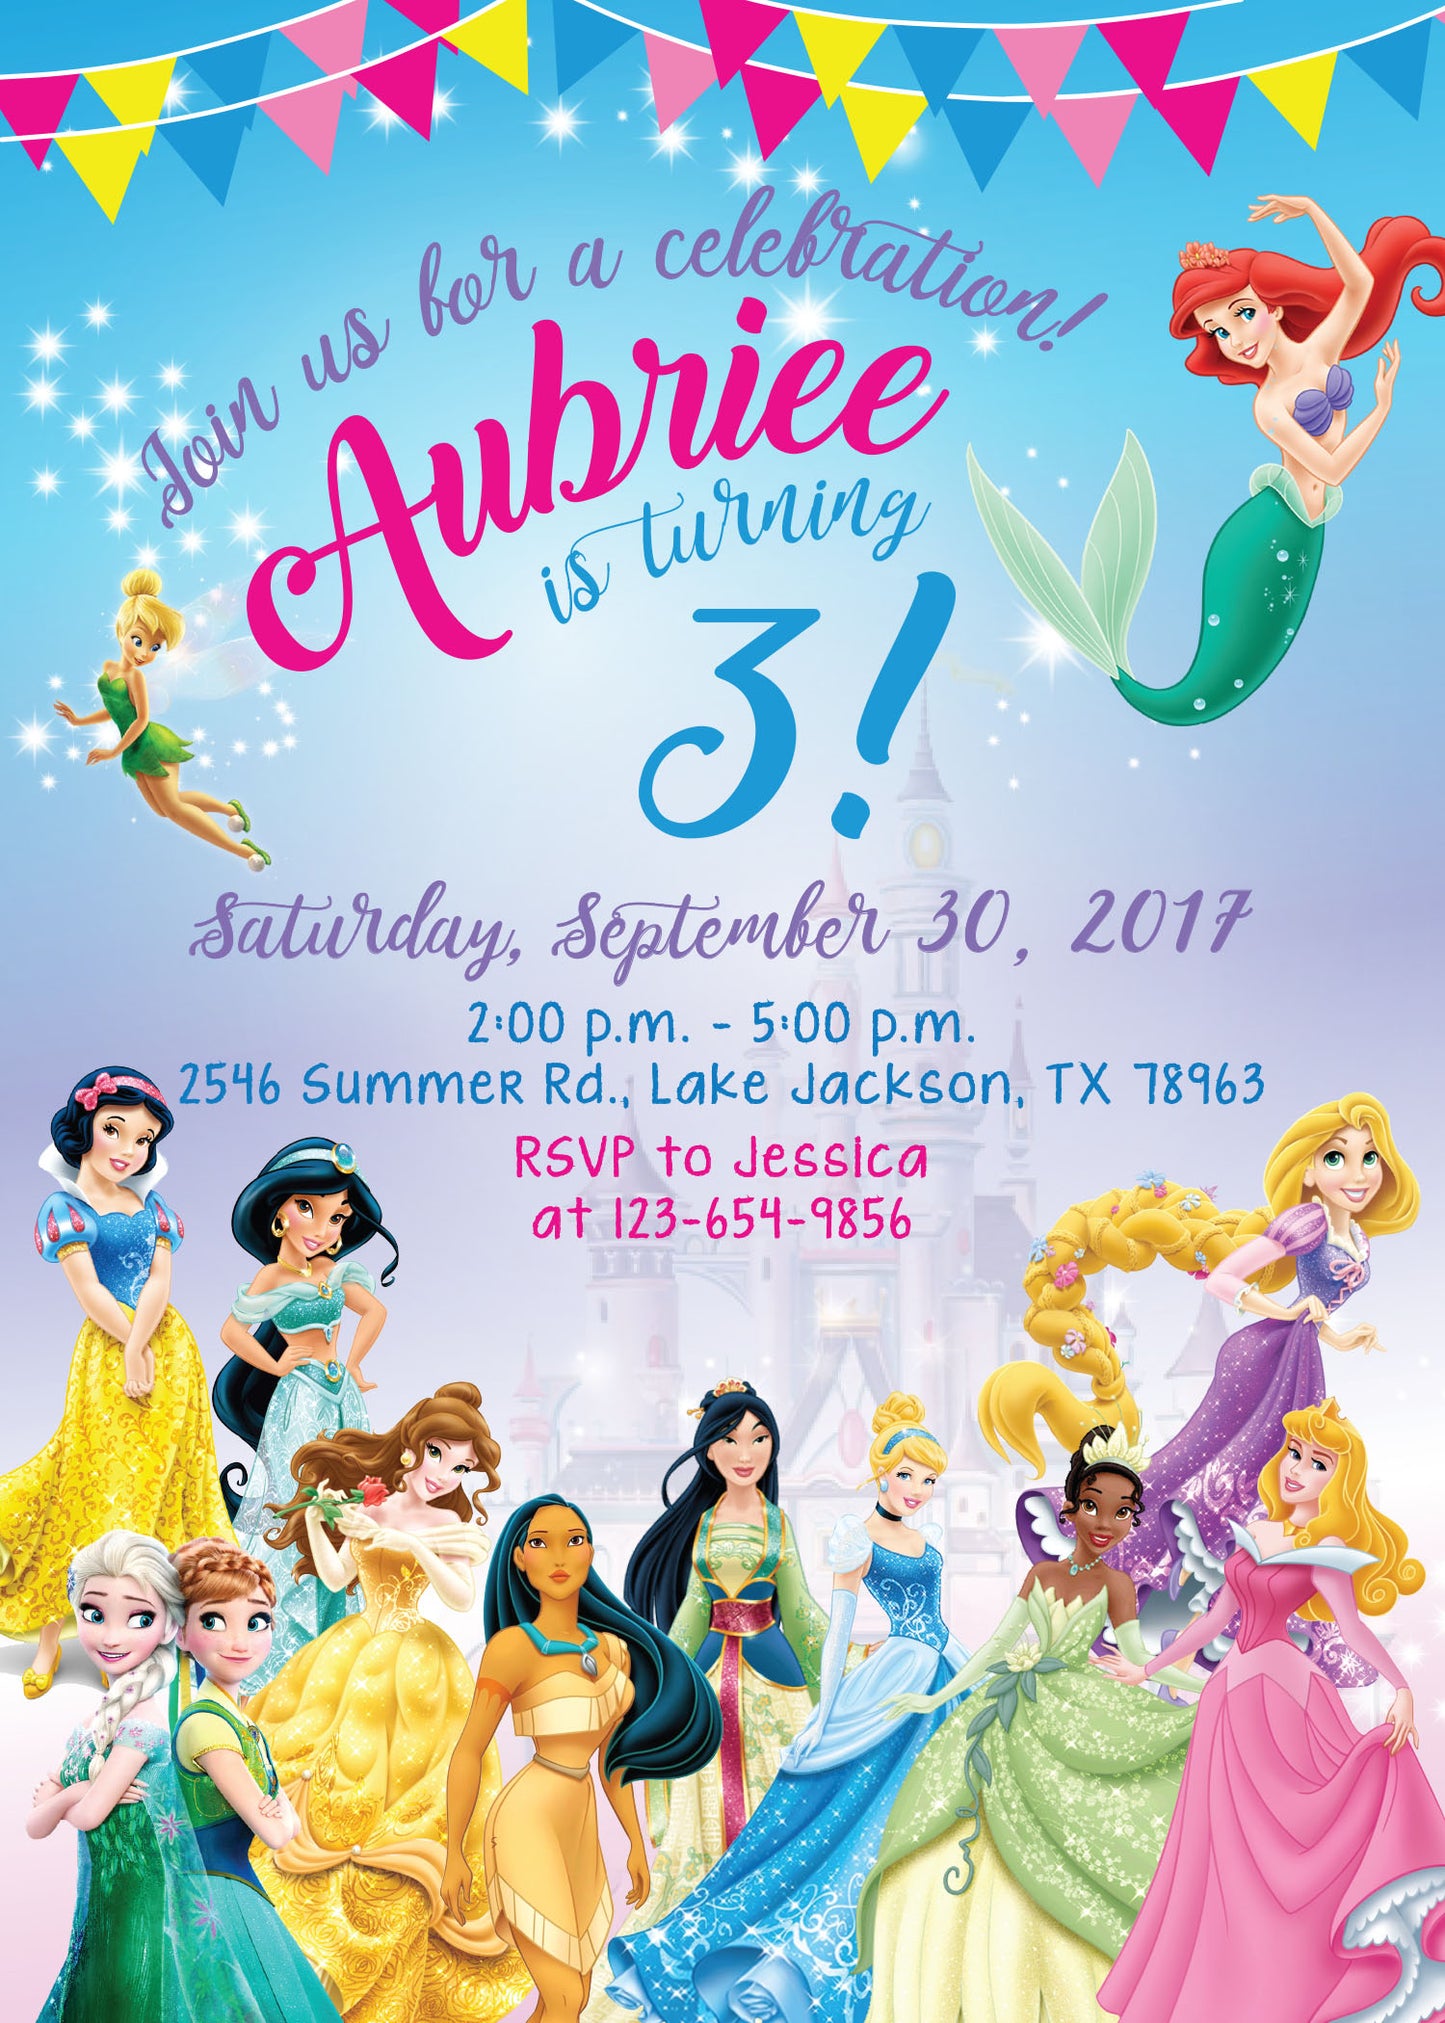 Disney Princess Invitation With or Without Photo! Belle, Snow White, Cinderella, Ariel, Jasmine & more! Printed or Digital!